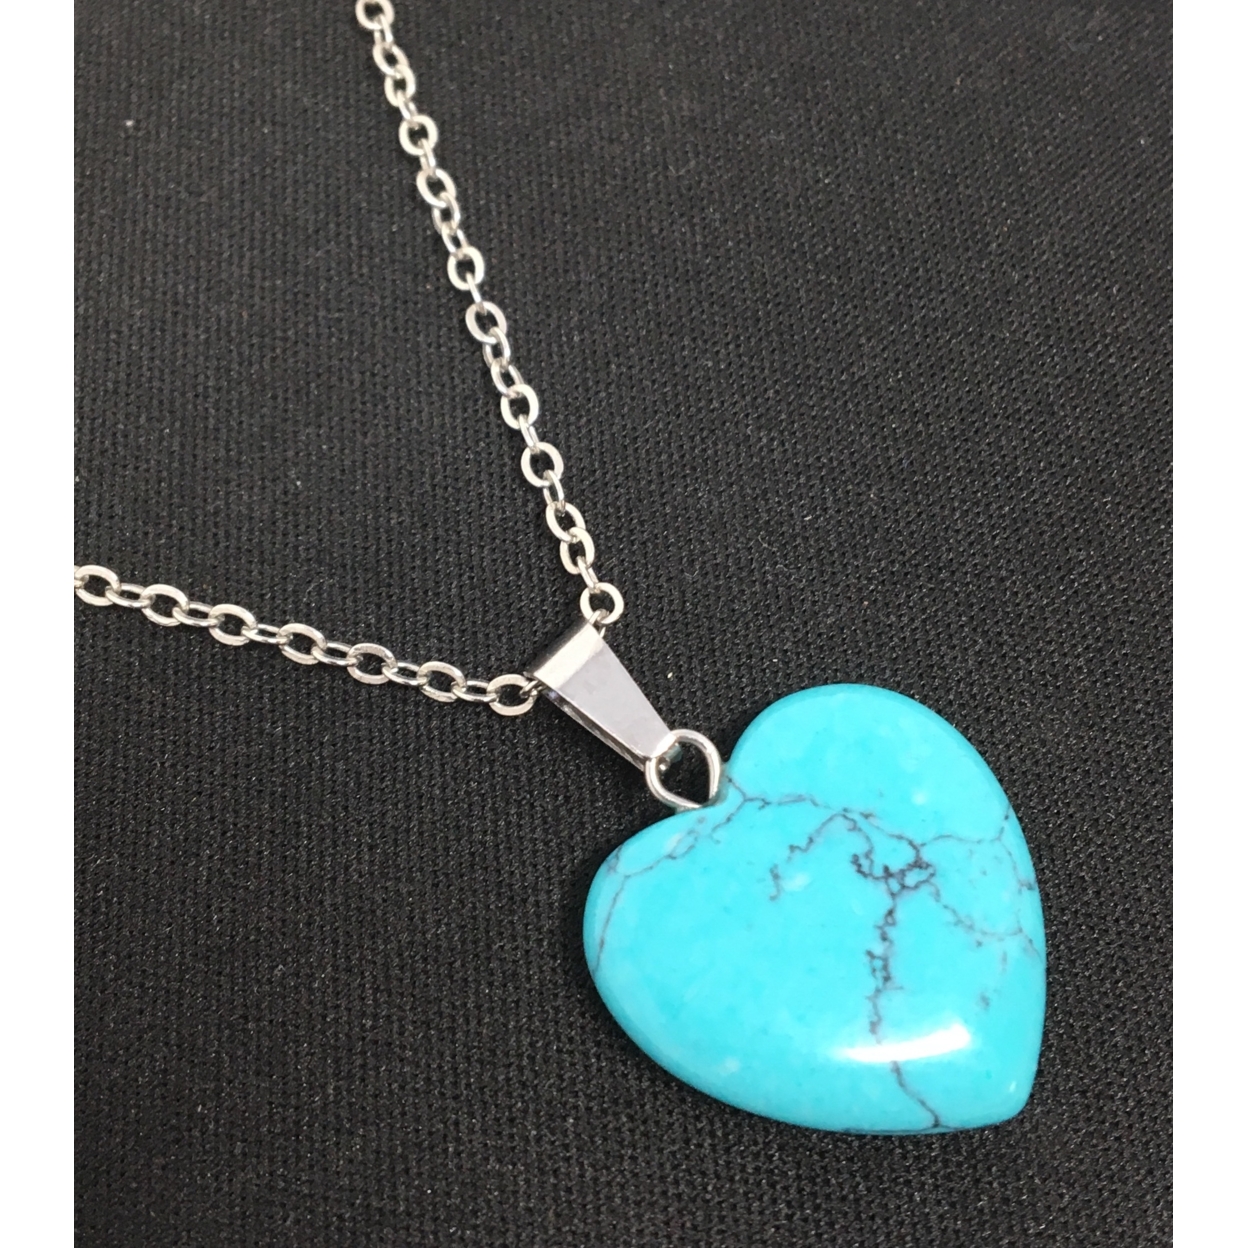 Sterling Silver Plated Stone Heart Pendant Necklace - Turquoise